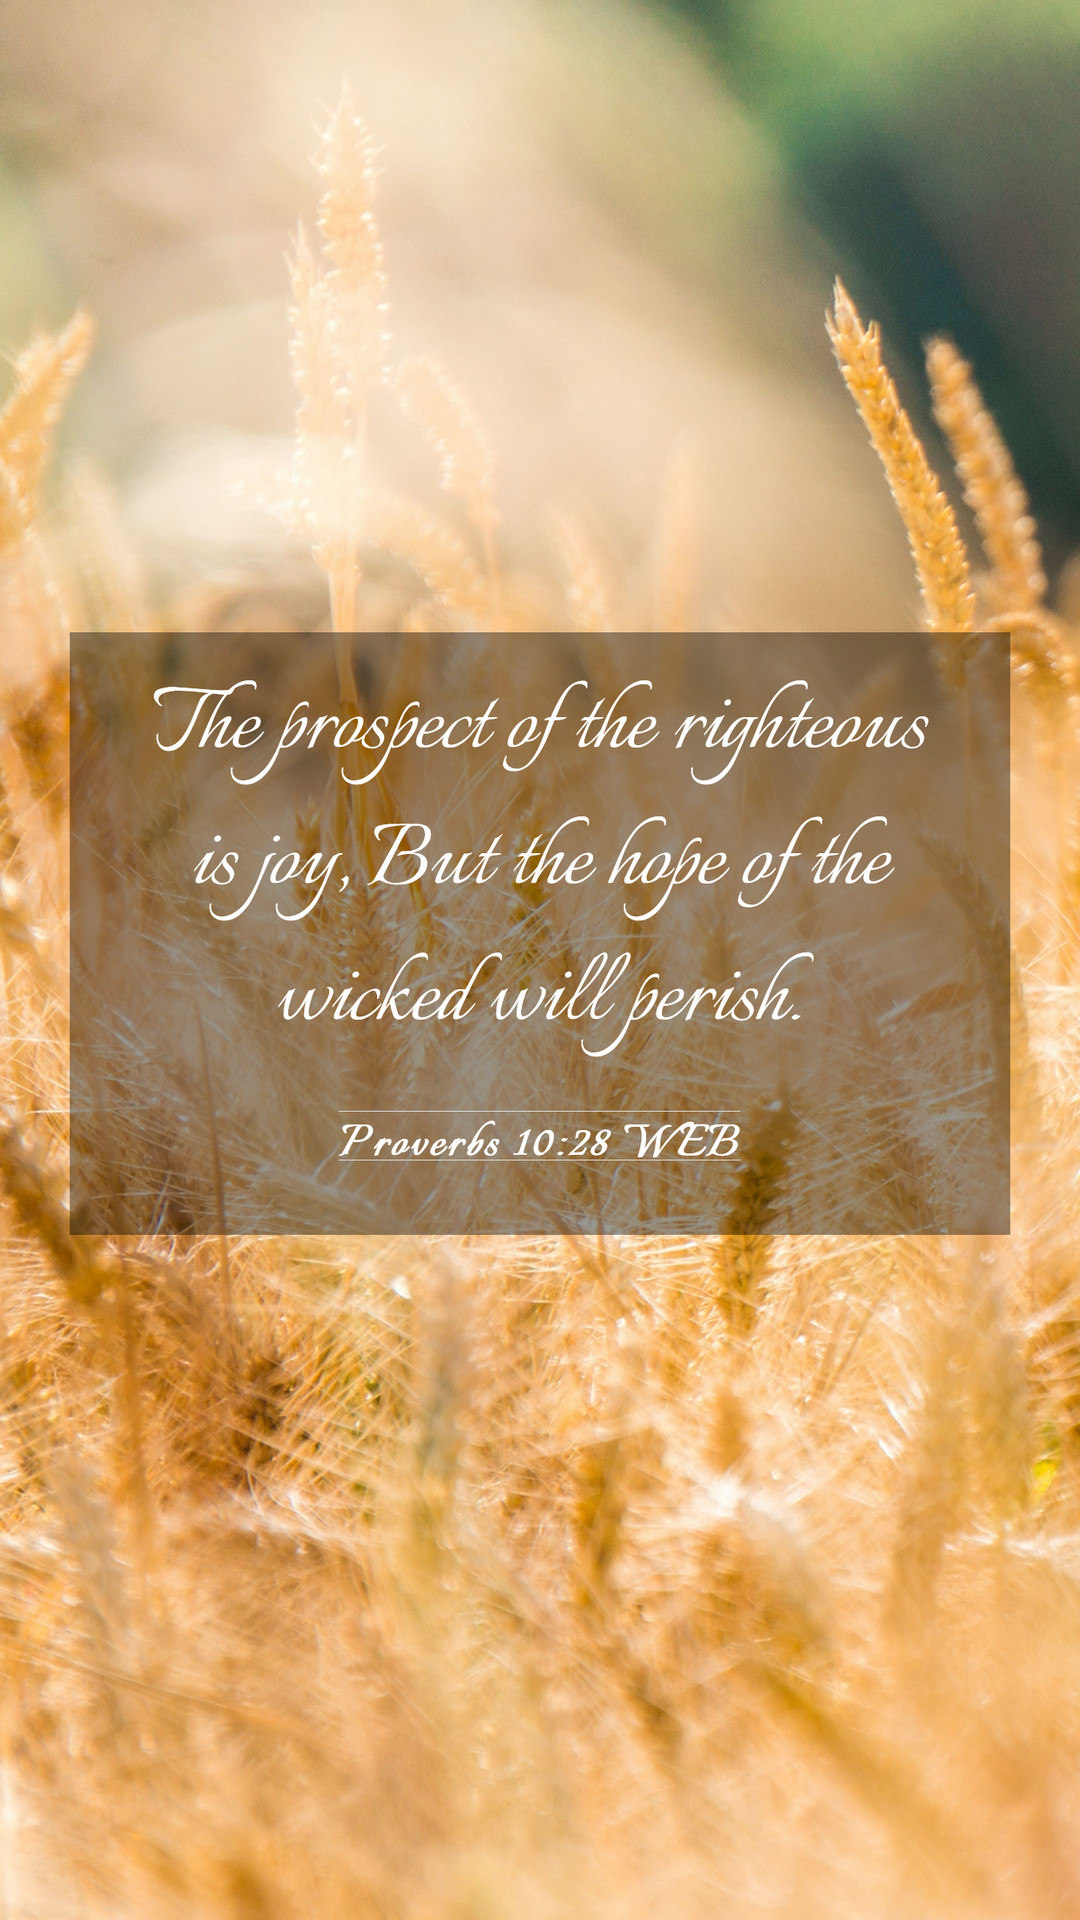 Proverbs 10:28 WEB Mobile Phone Wallpaper prospect of the righteous is joy, But the